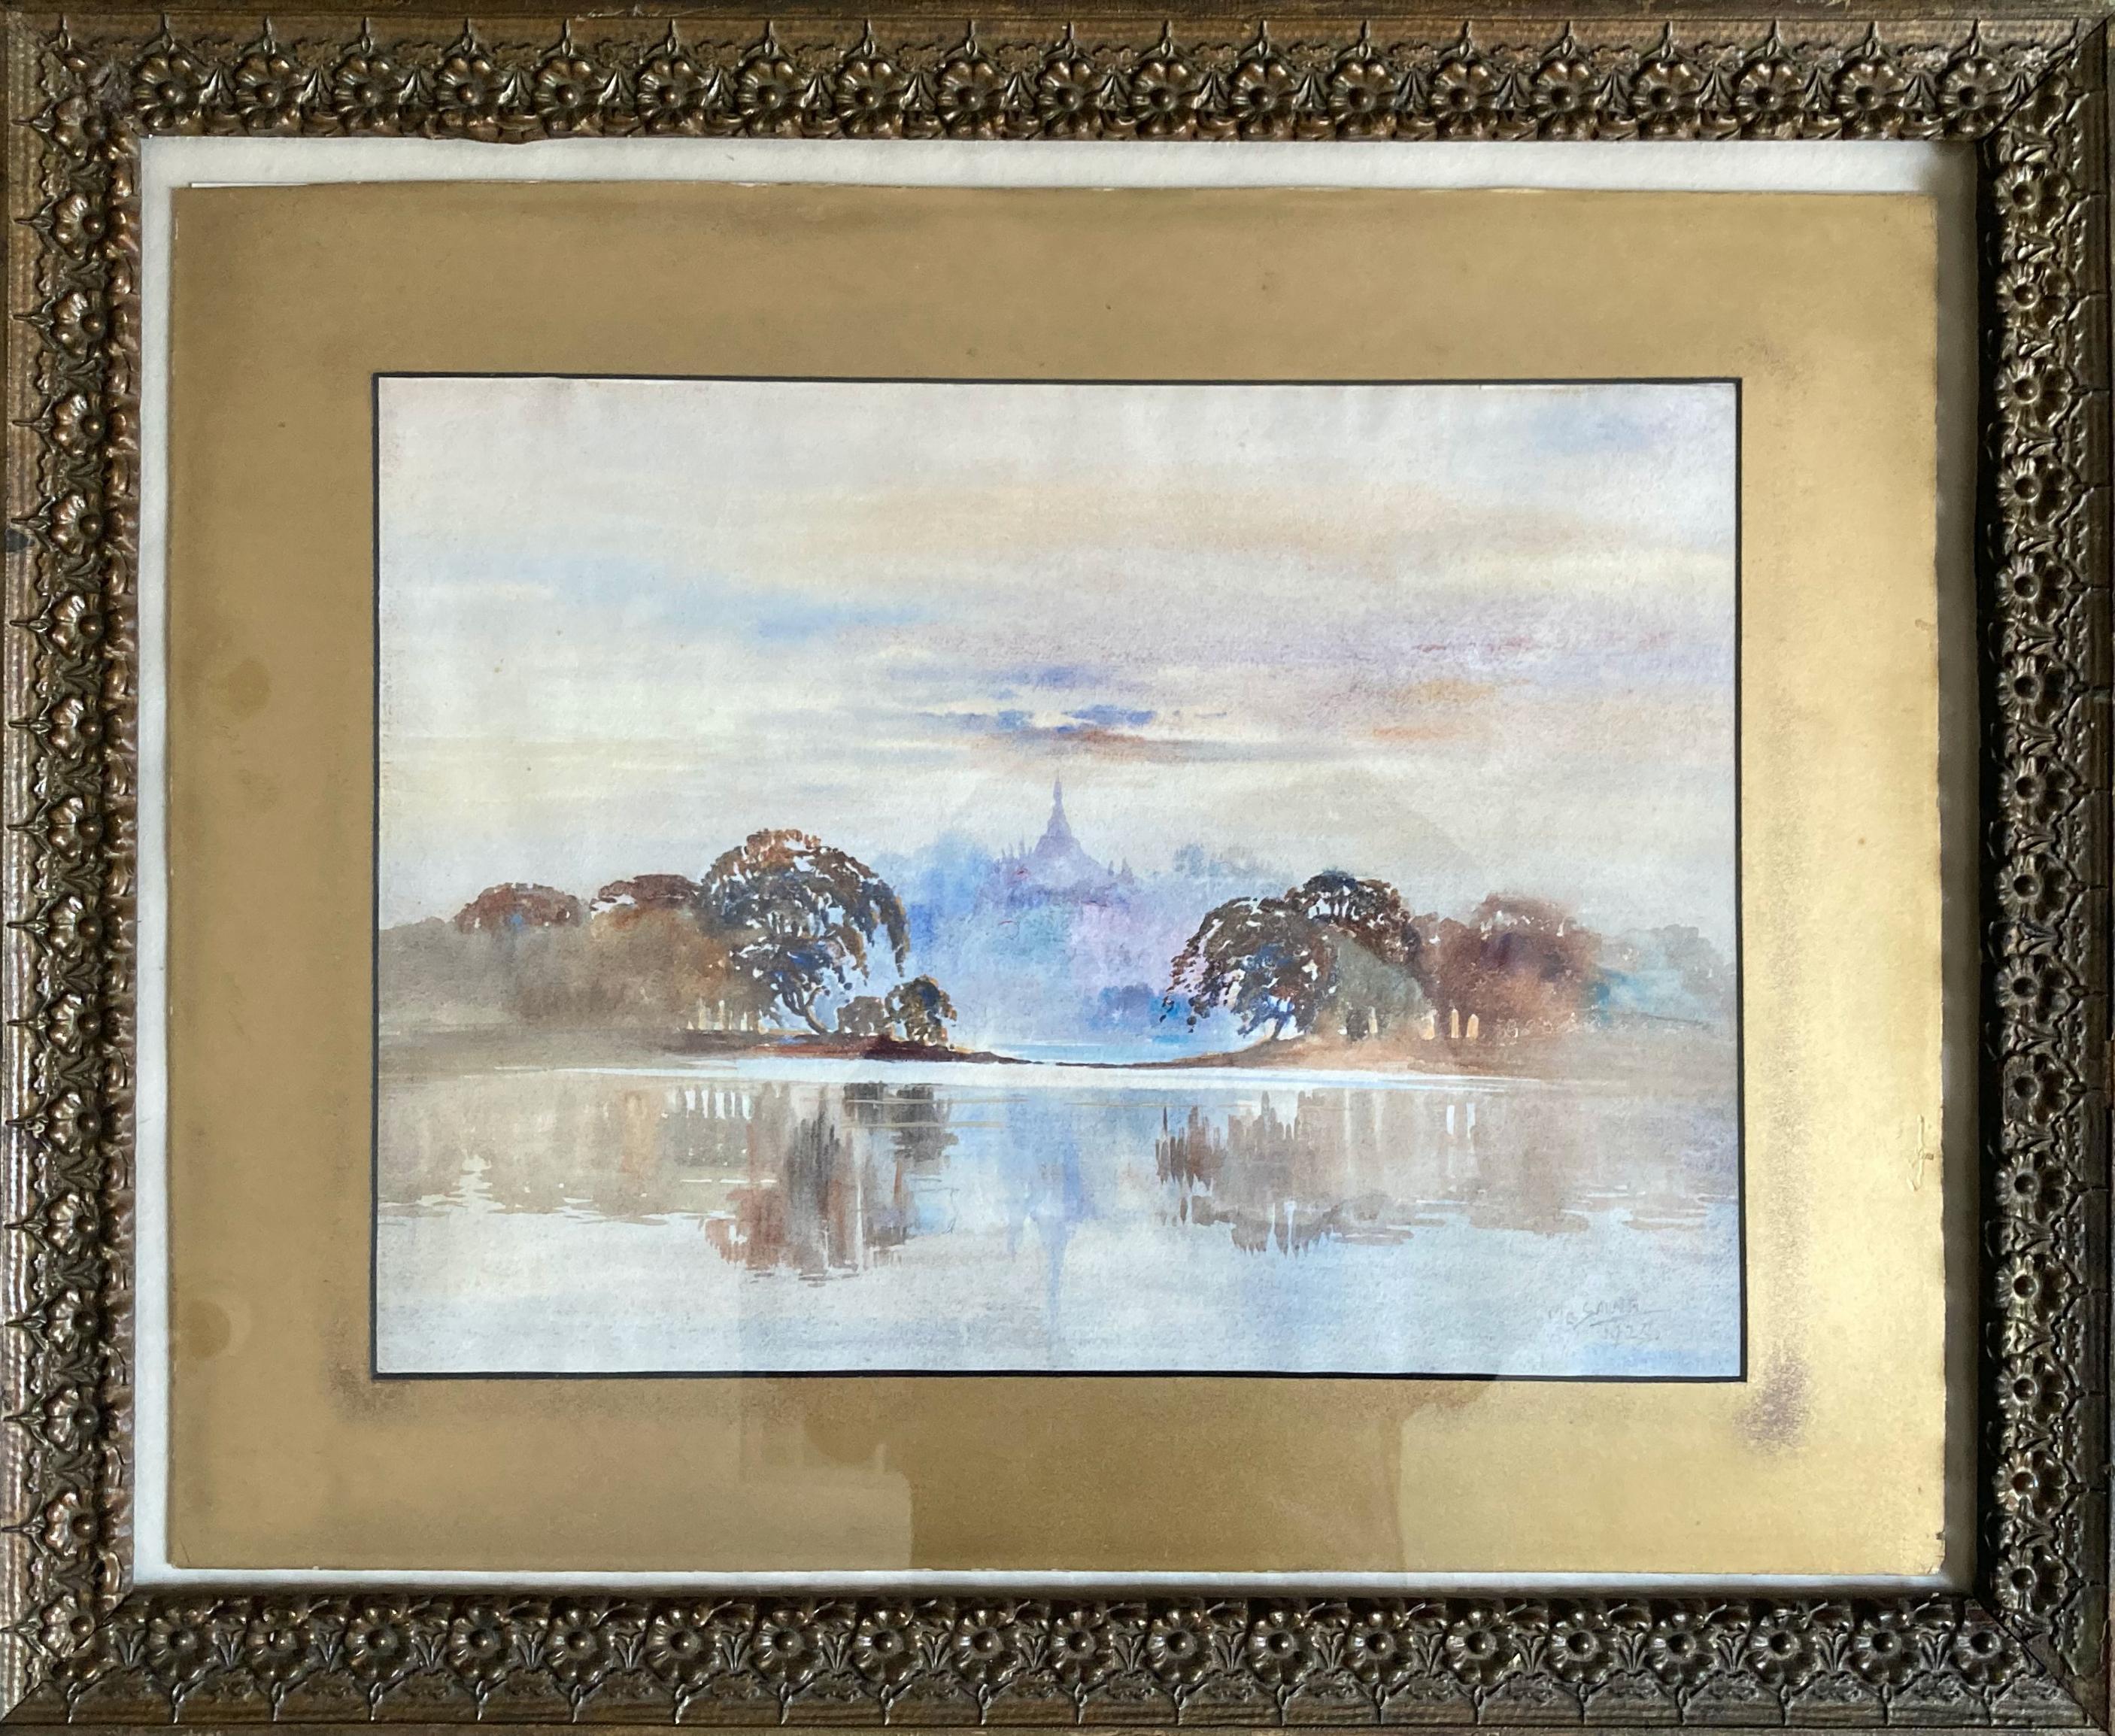 M. C. Laung Landscape Art - "Lake Scene" - Framed Early 20th Century Watercolor Seascape Painting